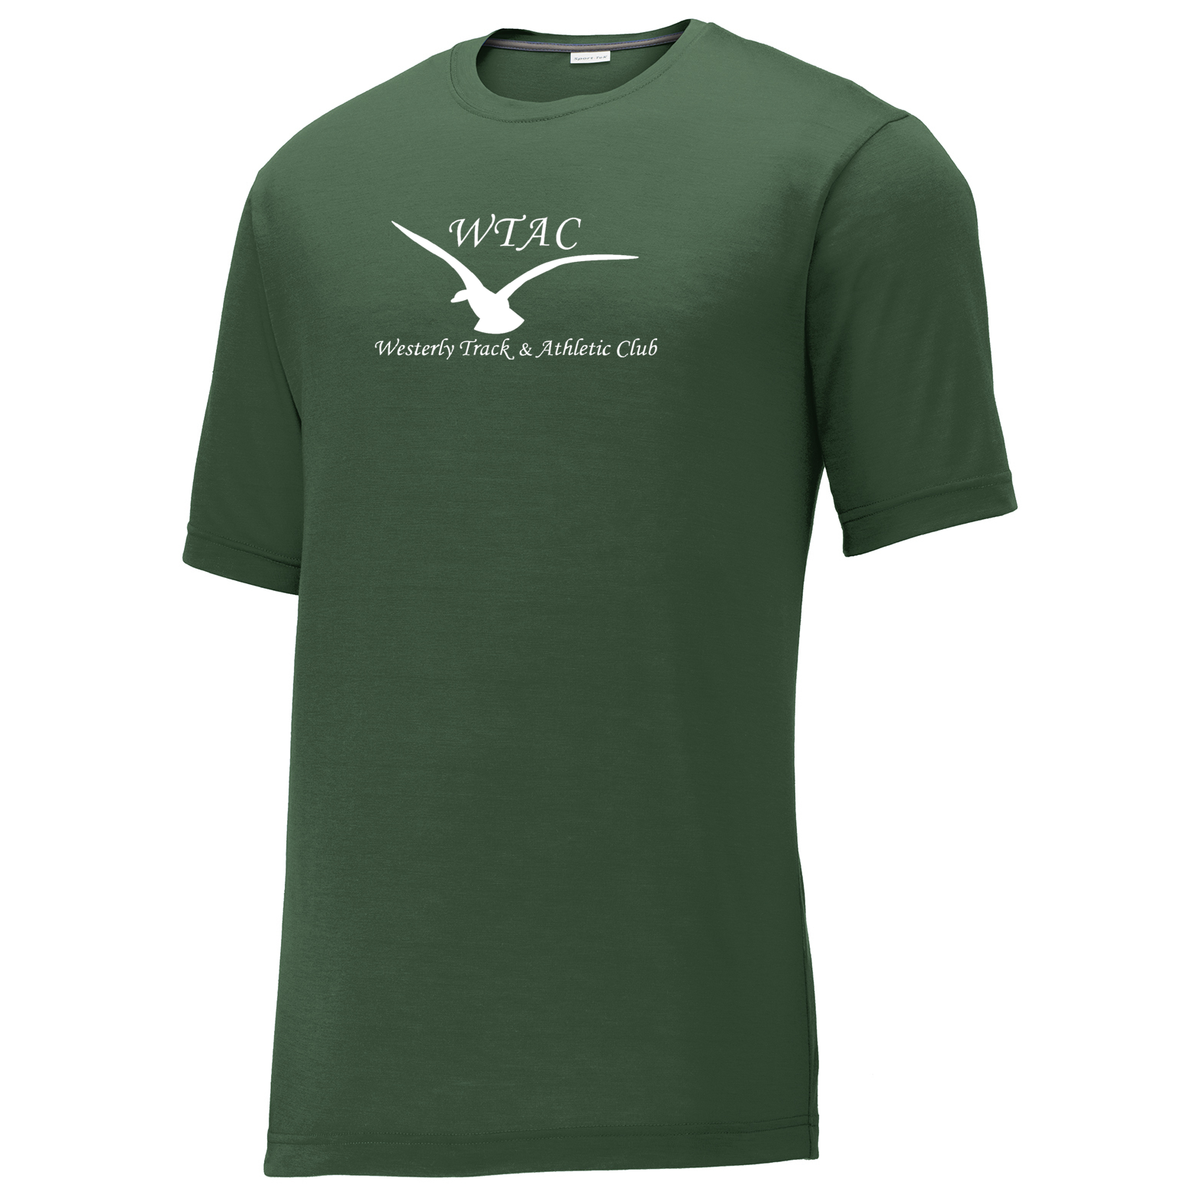 Westerly Track & Athletic Club CottonTouch Performance T-Shirt